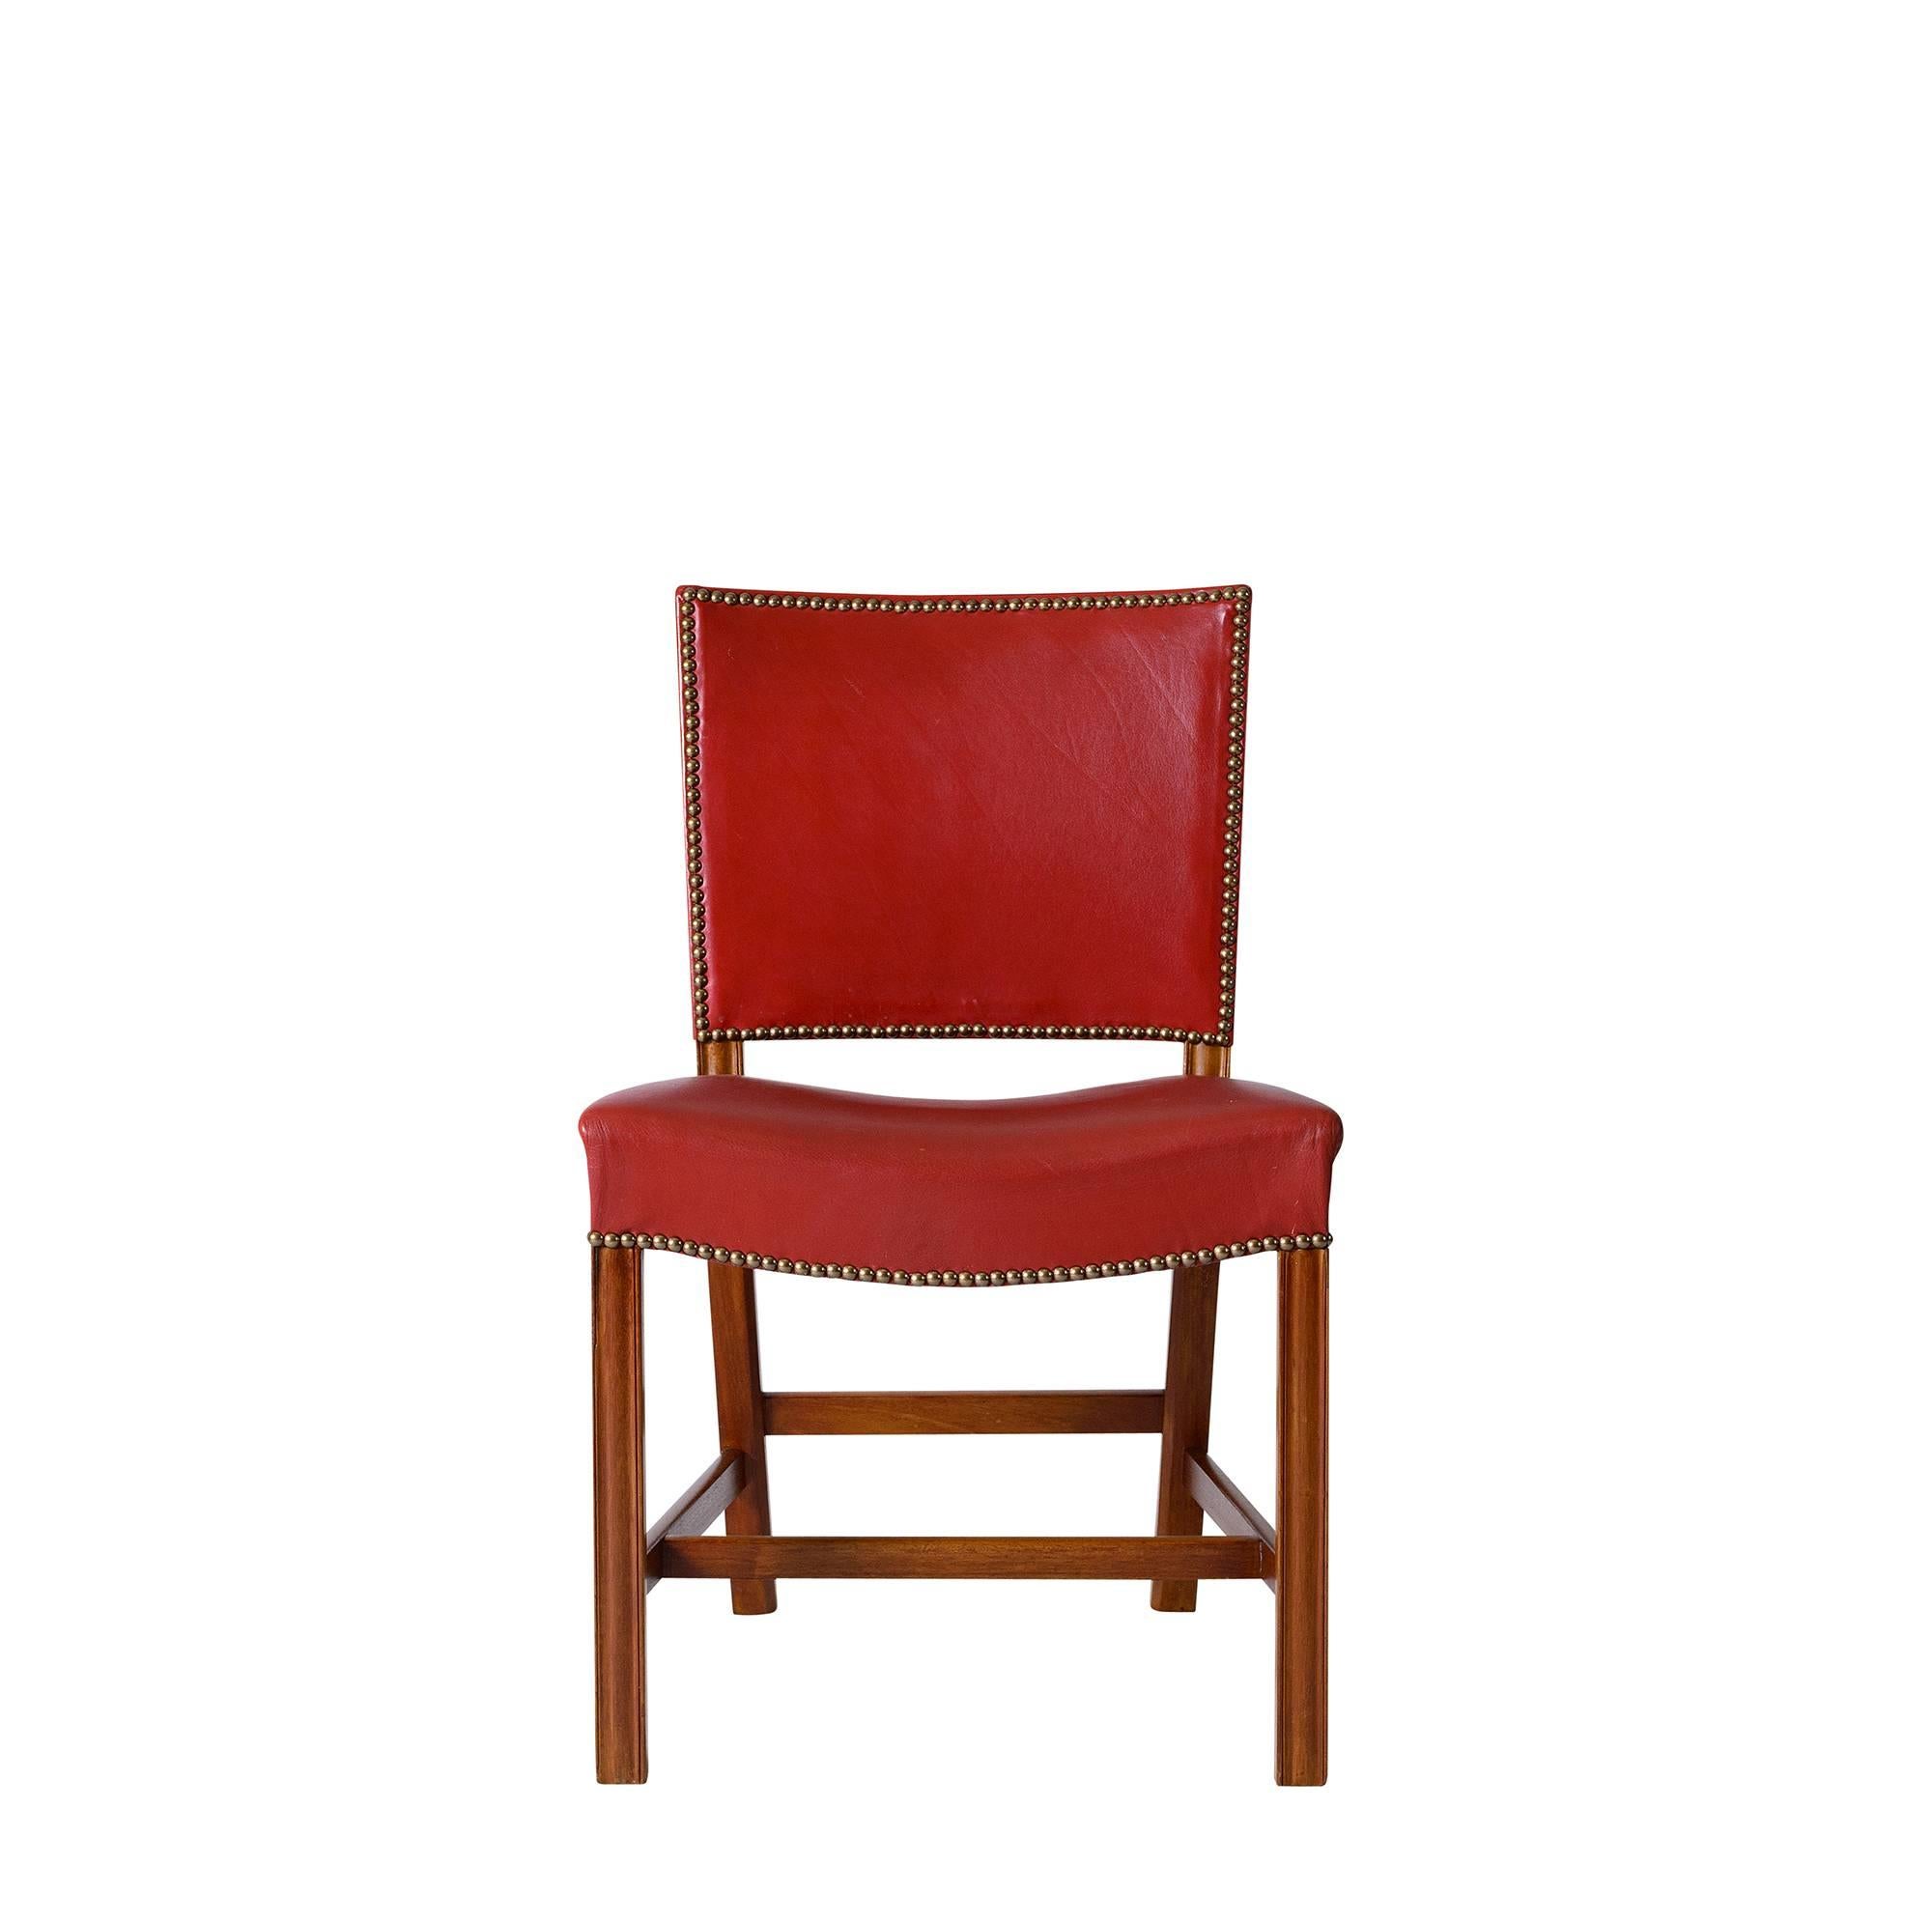 Set of eight Kaare Klint dining chairs designed in 1927 and produced by Rud Rasmussen.